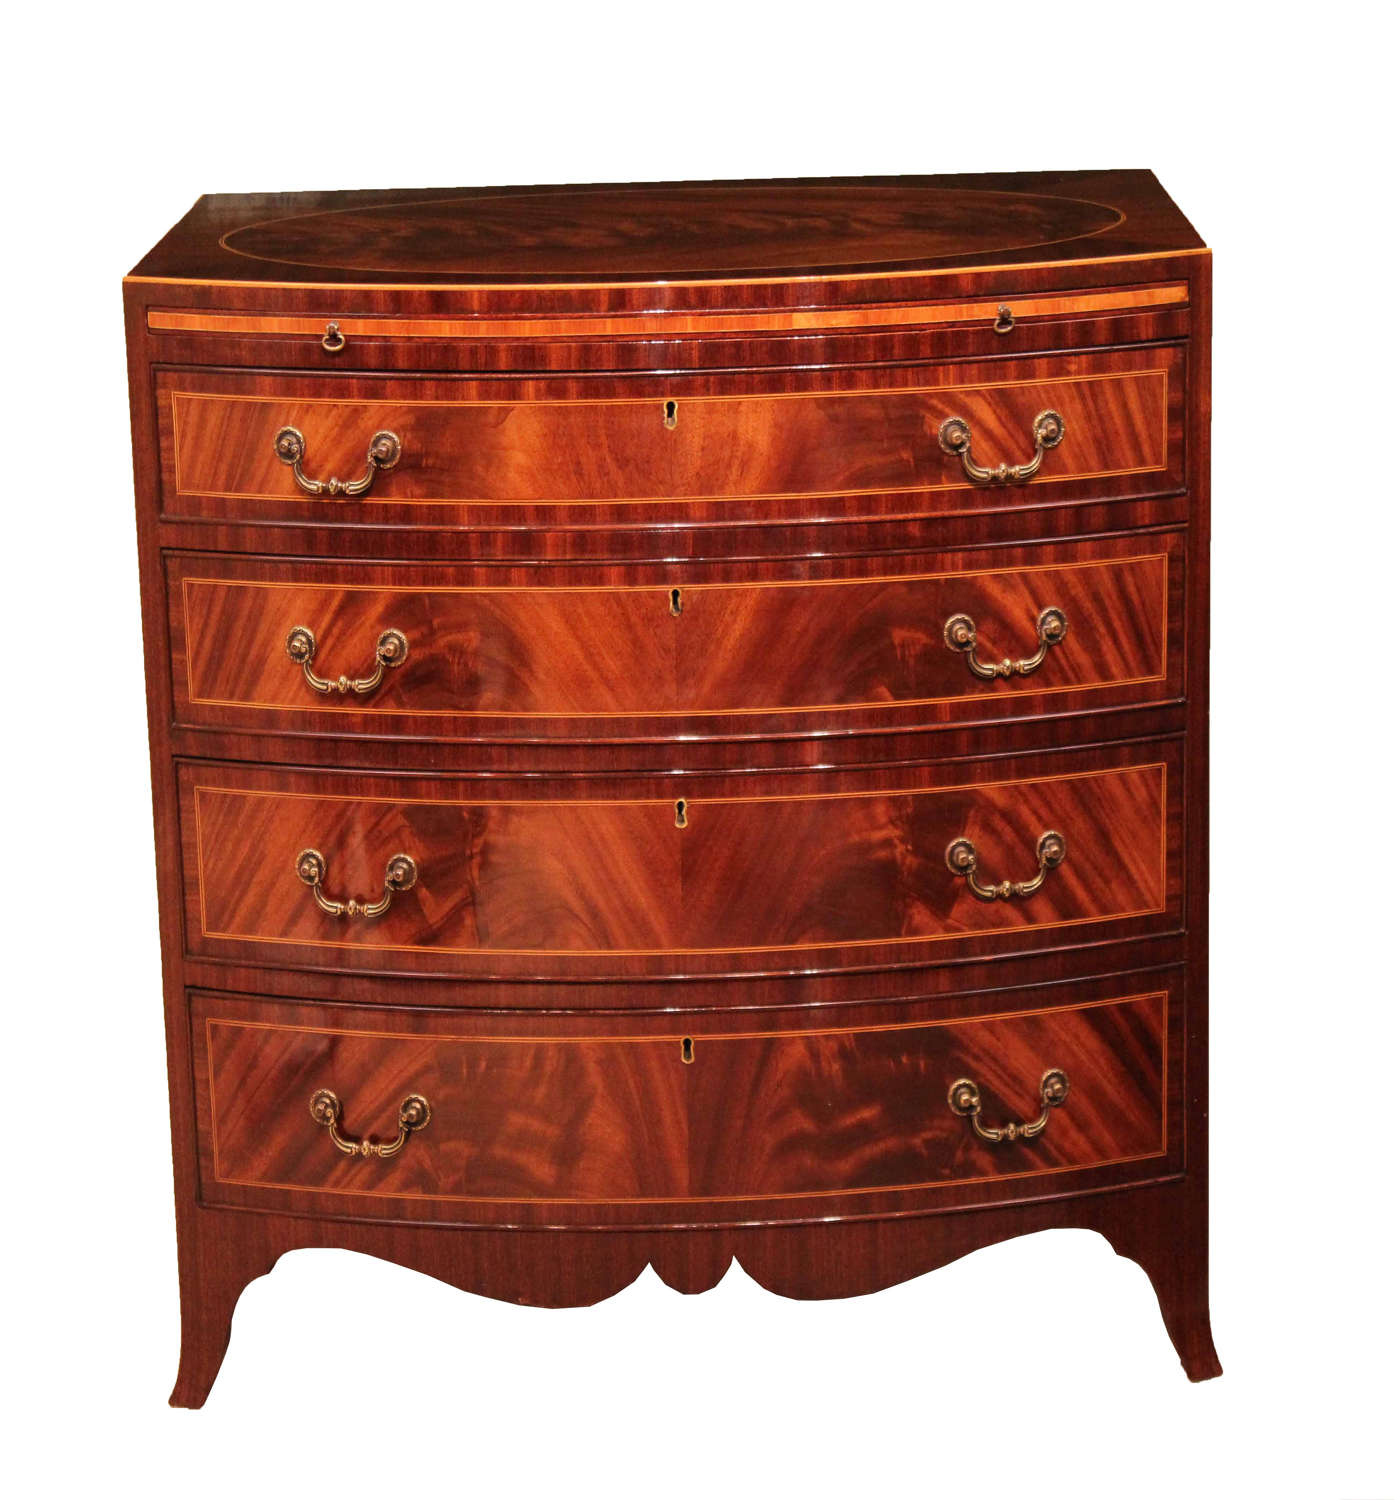 The Quality Edwardian Mahogany inlaid bow fronted chest